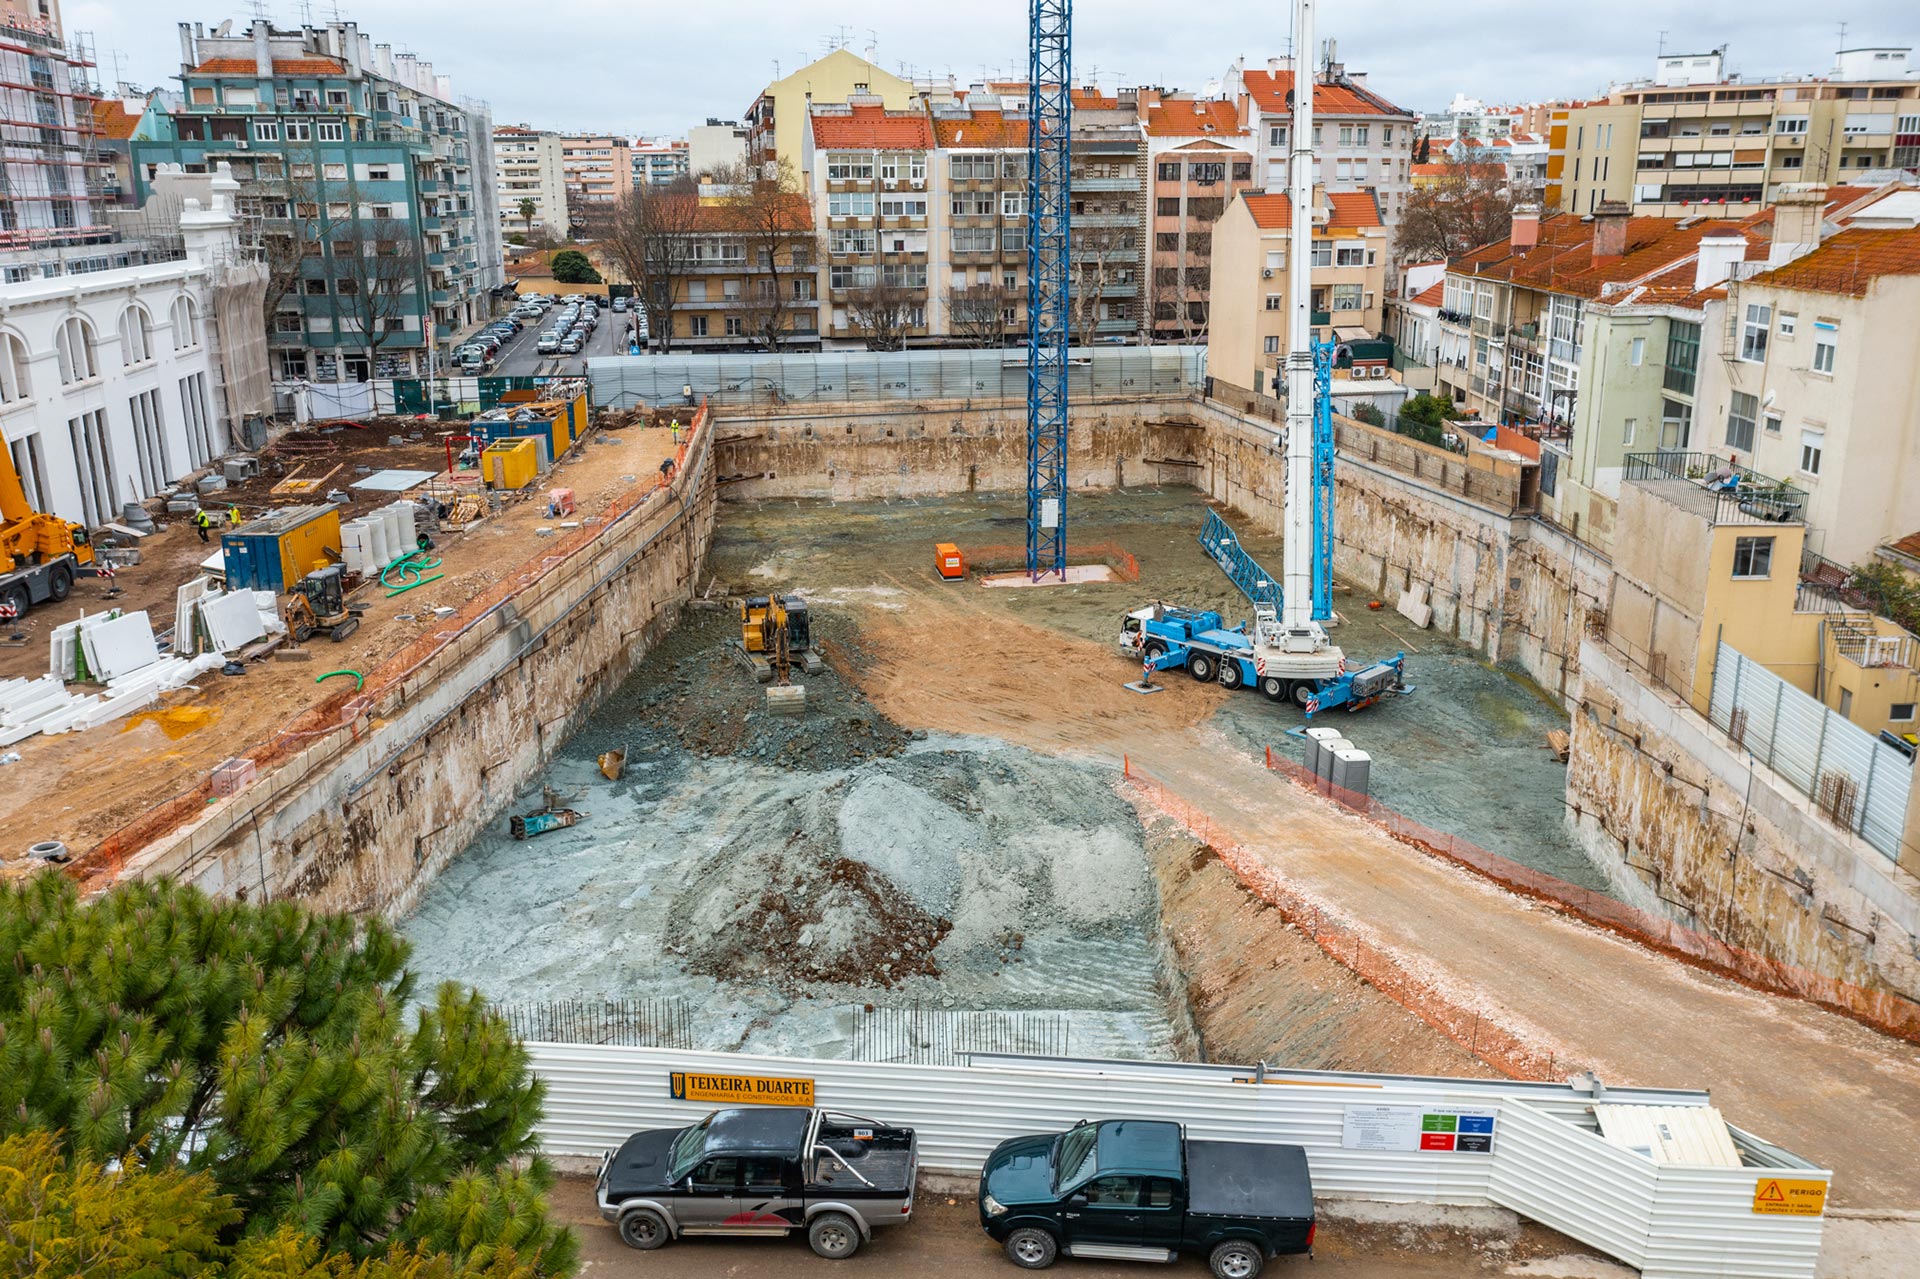 FEBRUARY 2022: COMPLETION OF EXCAVATION